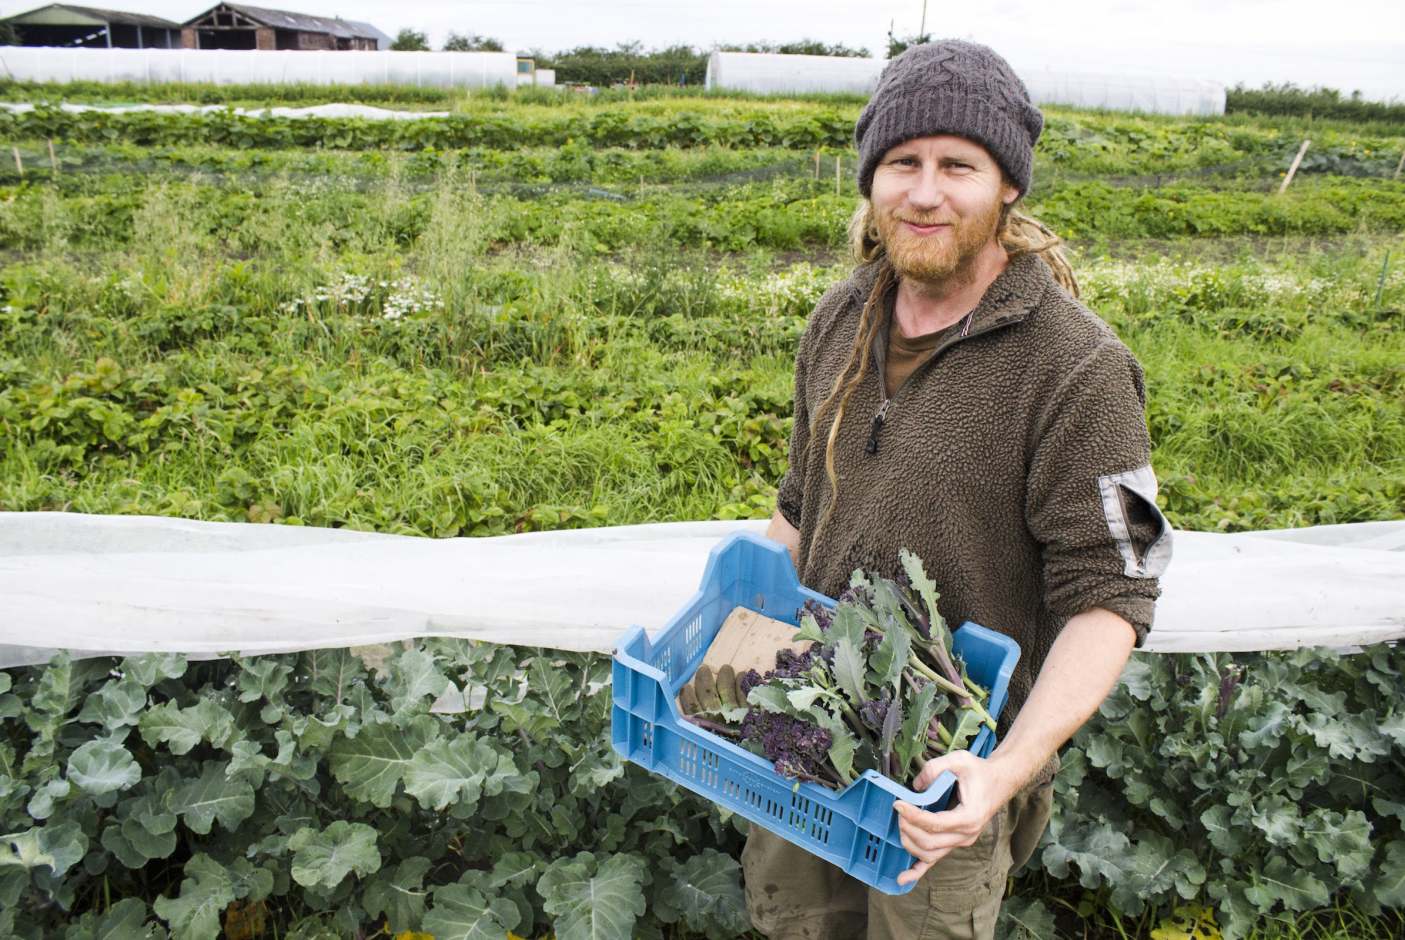 Surge in demand for veg boxes since pandemic | Ethical Consumer